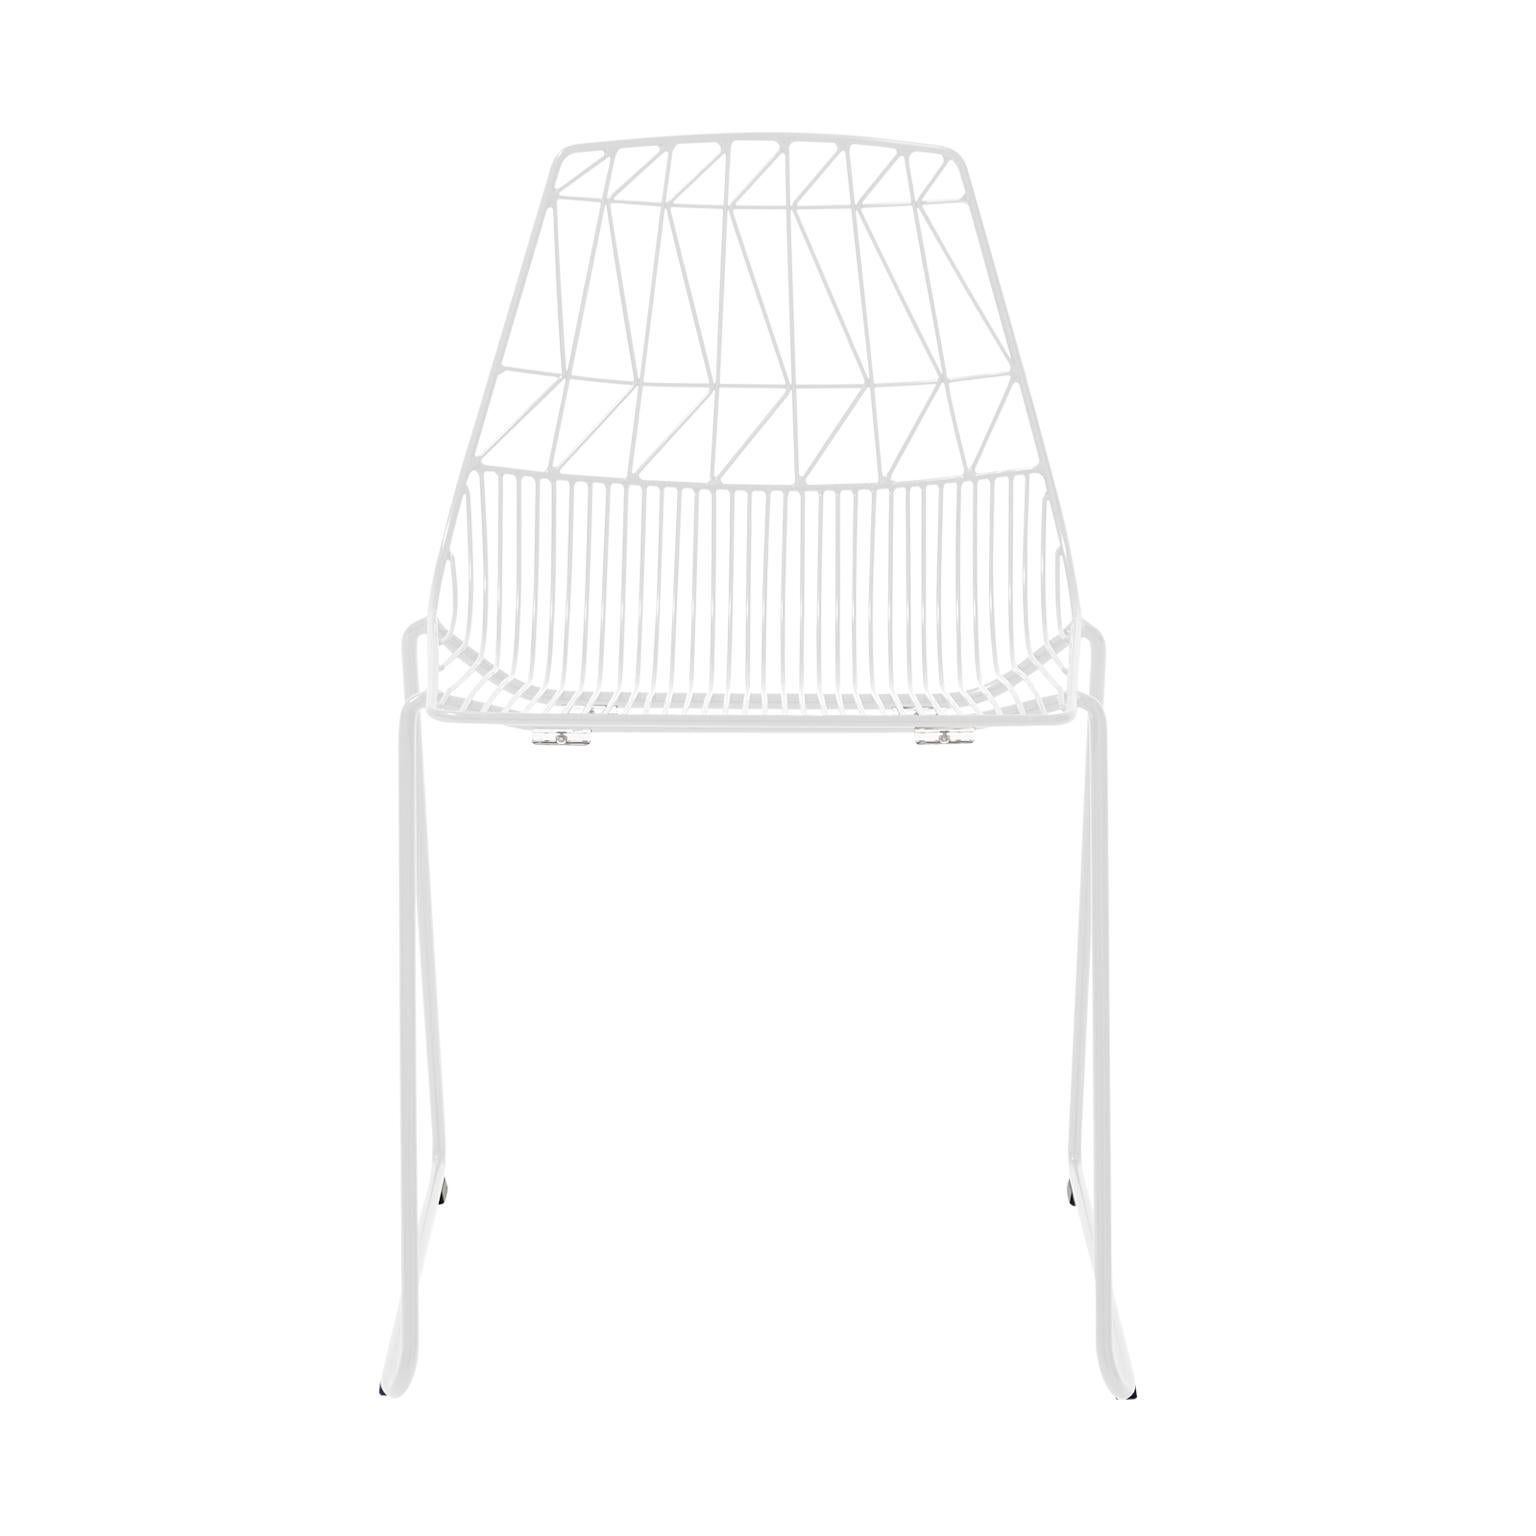 Bend Goods Wire Furniture
A classic wire dining chair, The Stacking Lucy chair combines versatility with Mid-Century Modern wire design. Great for outdoor commercial seating with the ability to stack up to 6 chairs for easy storage. UPS standard